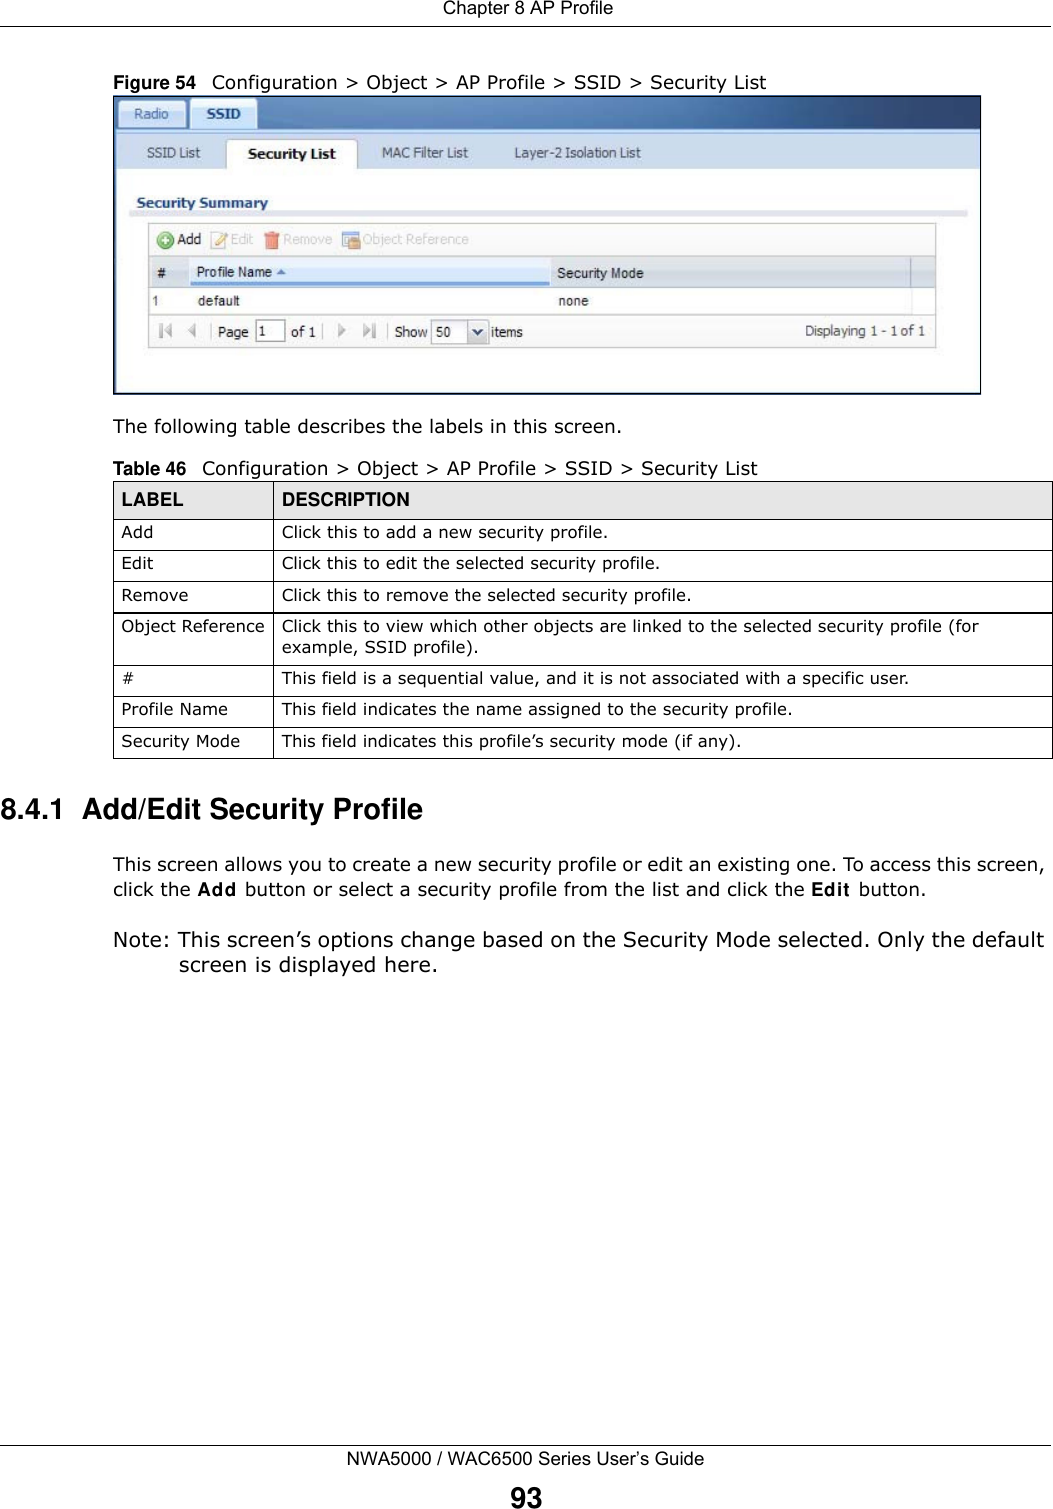  Chapter 8 AP ProfileNWA5000 / WAC6500 Series User’s Guide93Figure 54   Configuration &gt; Object &gt; AP Profile &gt; SSID &gt; Security ListThe following table describes the labels in this screen.  8.4.1  Add/Edit Security ProfileThis screen allows you to create a new security profile or edit an existing one. To access this screen, click the Add button or select a security profile from the list and click the Edit  button.Note: This screen’s options change based on the Security Mode selected. Only the default screen is displayed here.Table 46   Configuration &gt; Object &gt; AP Profile &gt; SSID &gt; Security ListLABEL DESCRIPTIONAdd Click this to add a new security profile.Edit Click this to edit the selected security profile.Remove Click this to remove the selected security profile.Object Reference Click this to view which other objects are linked to the selected security profile (for example, SSID profile).# This field is a sequential value, and it is not associated with a specific user.Profile Name This field indicates the name assigned to the security profile.Security Mode This field indicates this profile’s security mode (if any).